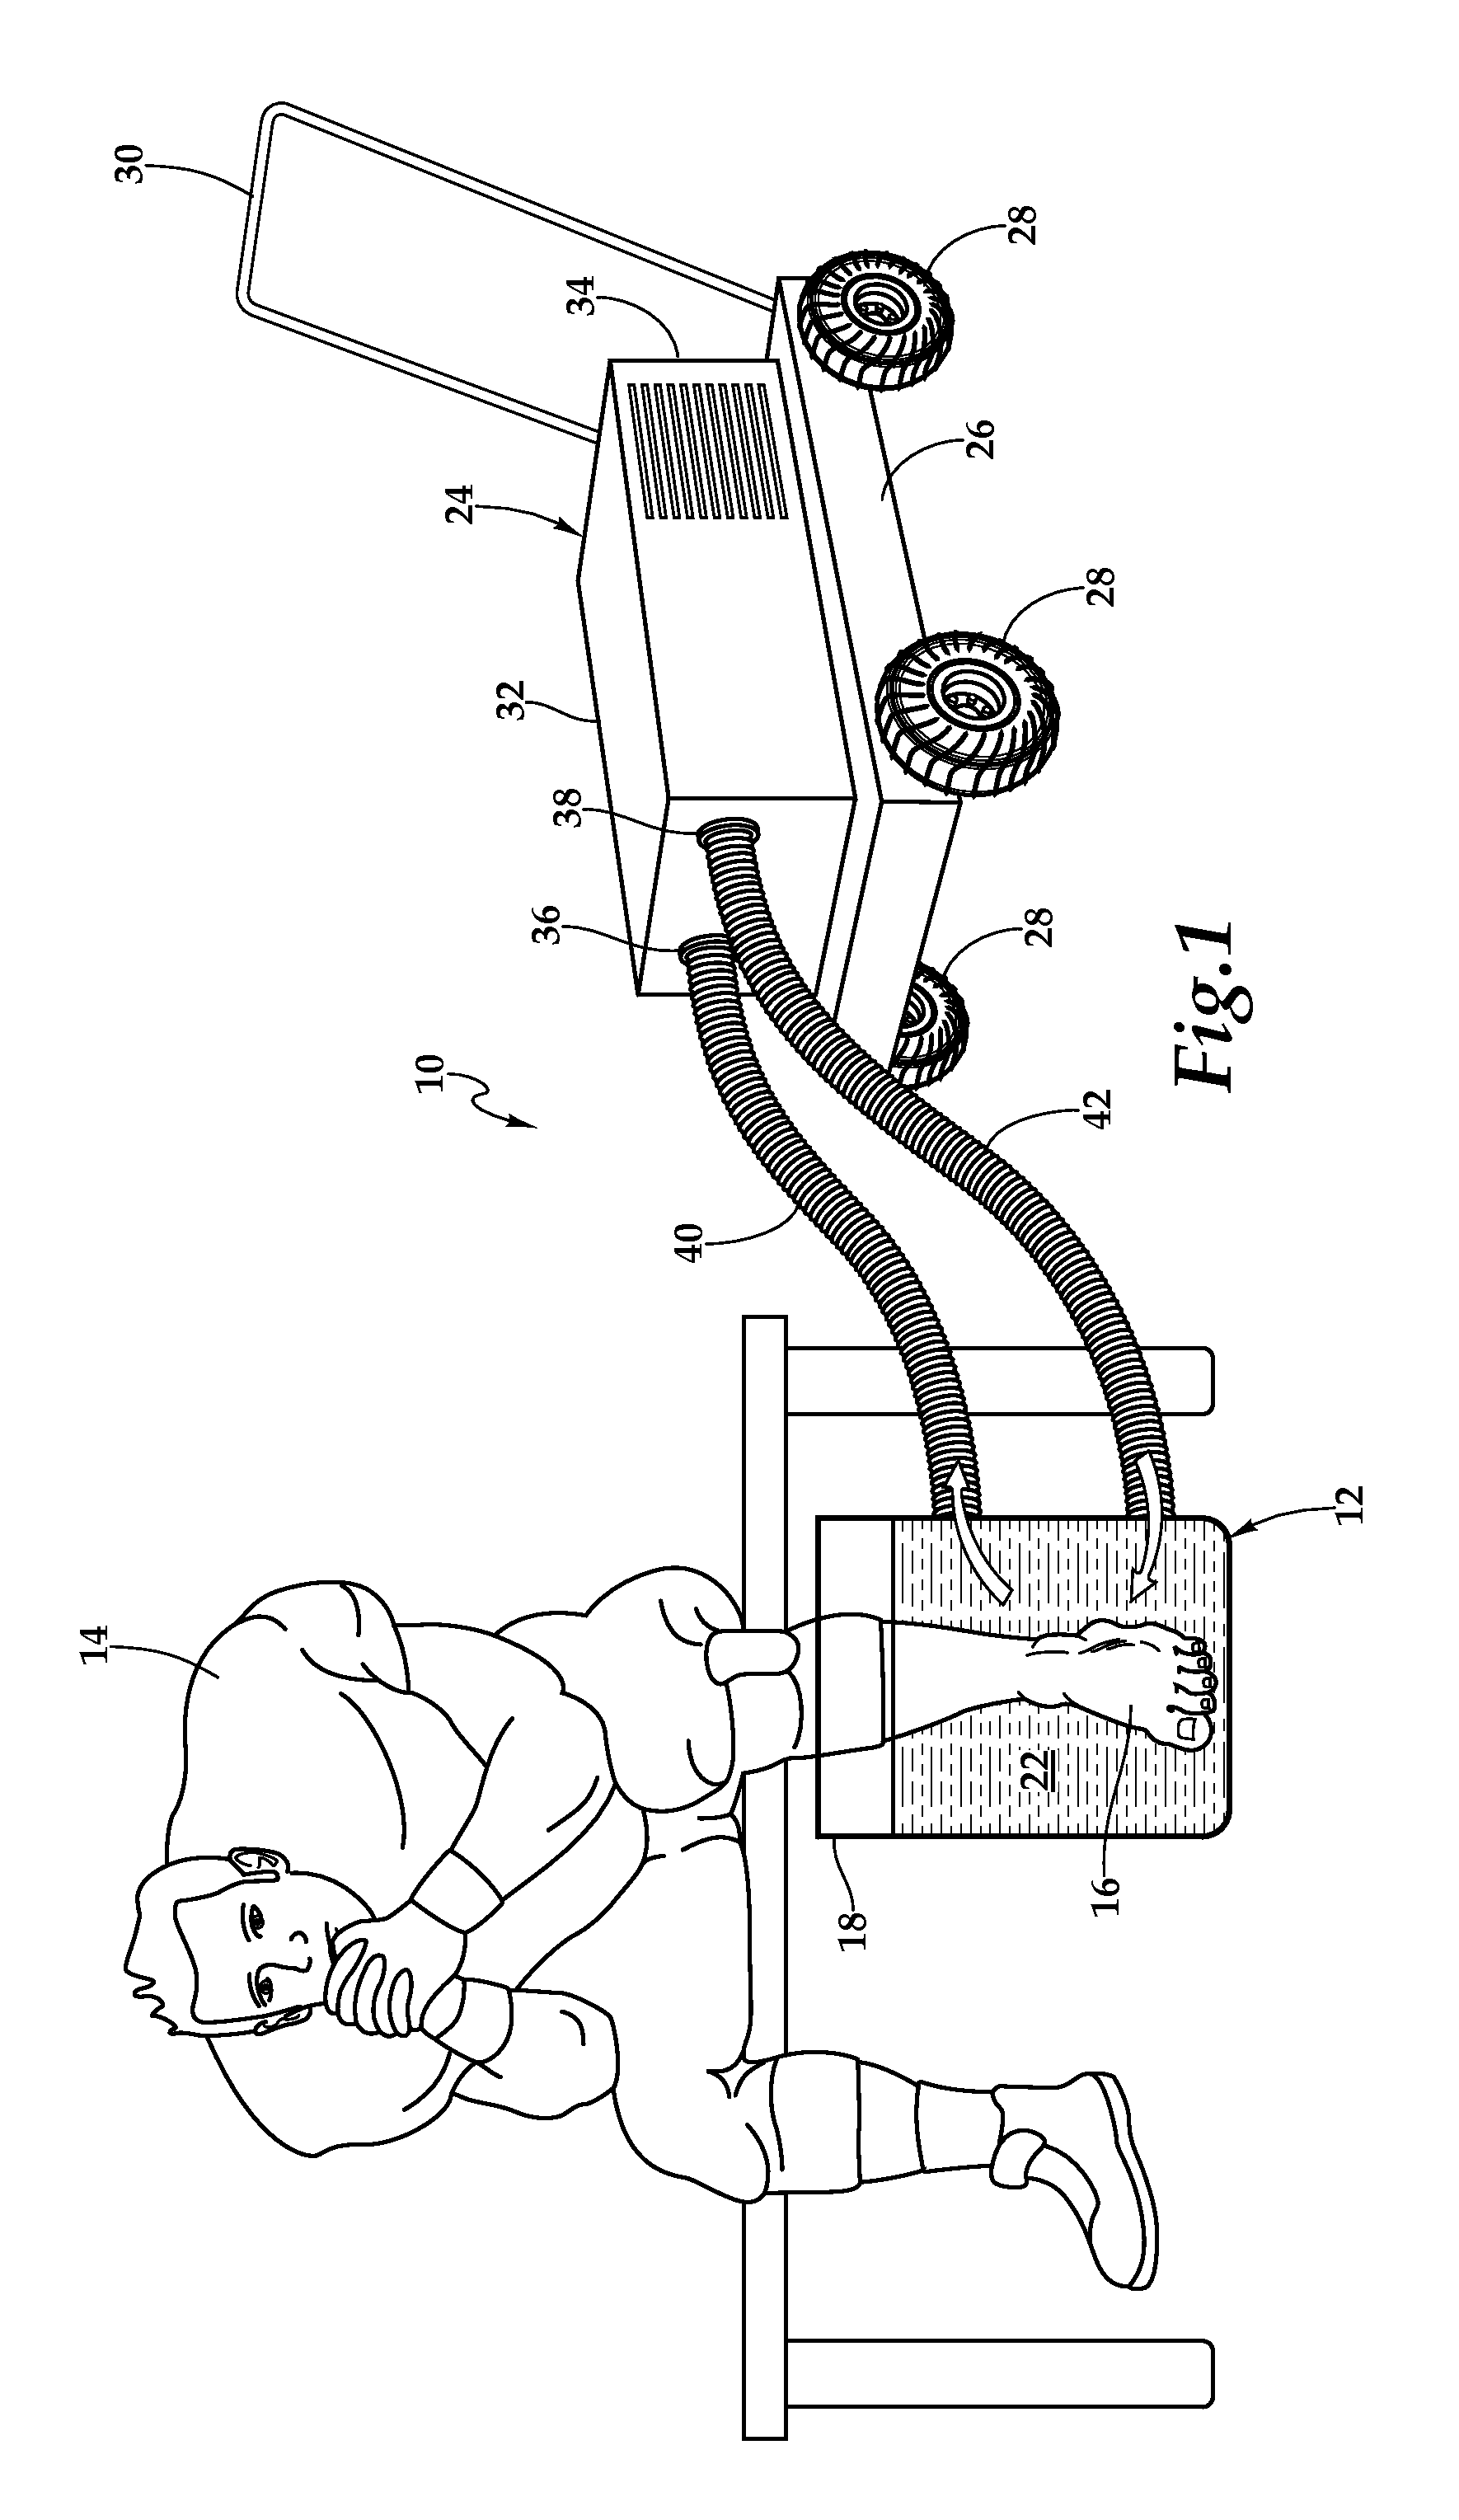 Portable Hydro-Thermal Therapy System for Use with a Vessel for Containing Water and Method for Use of Same